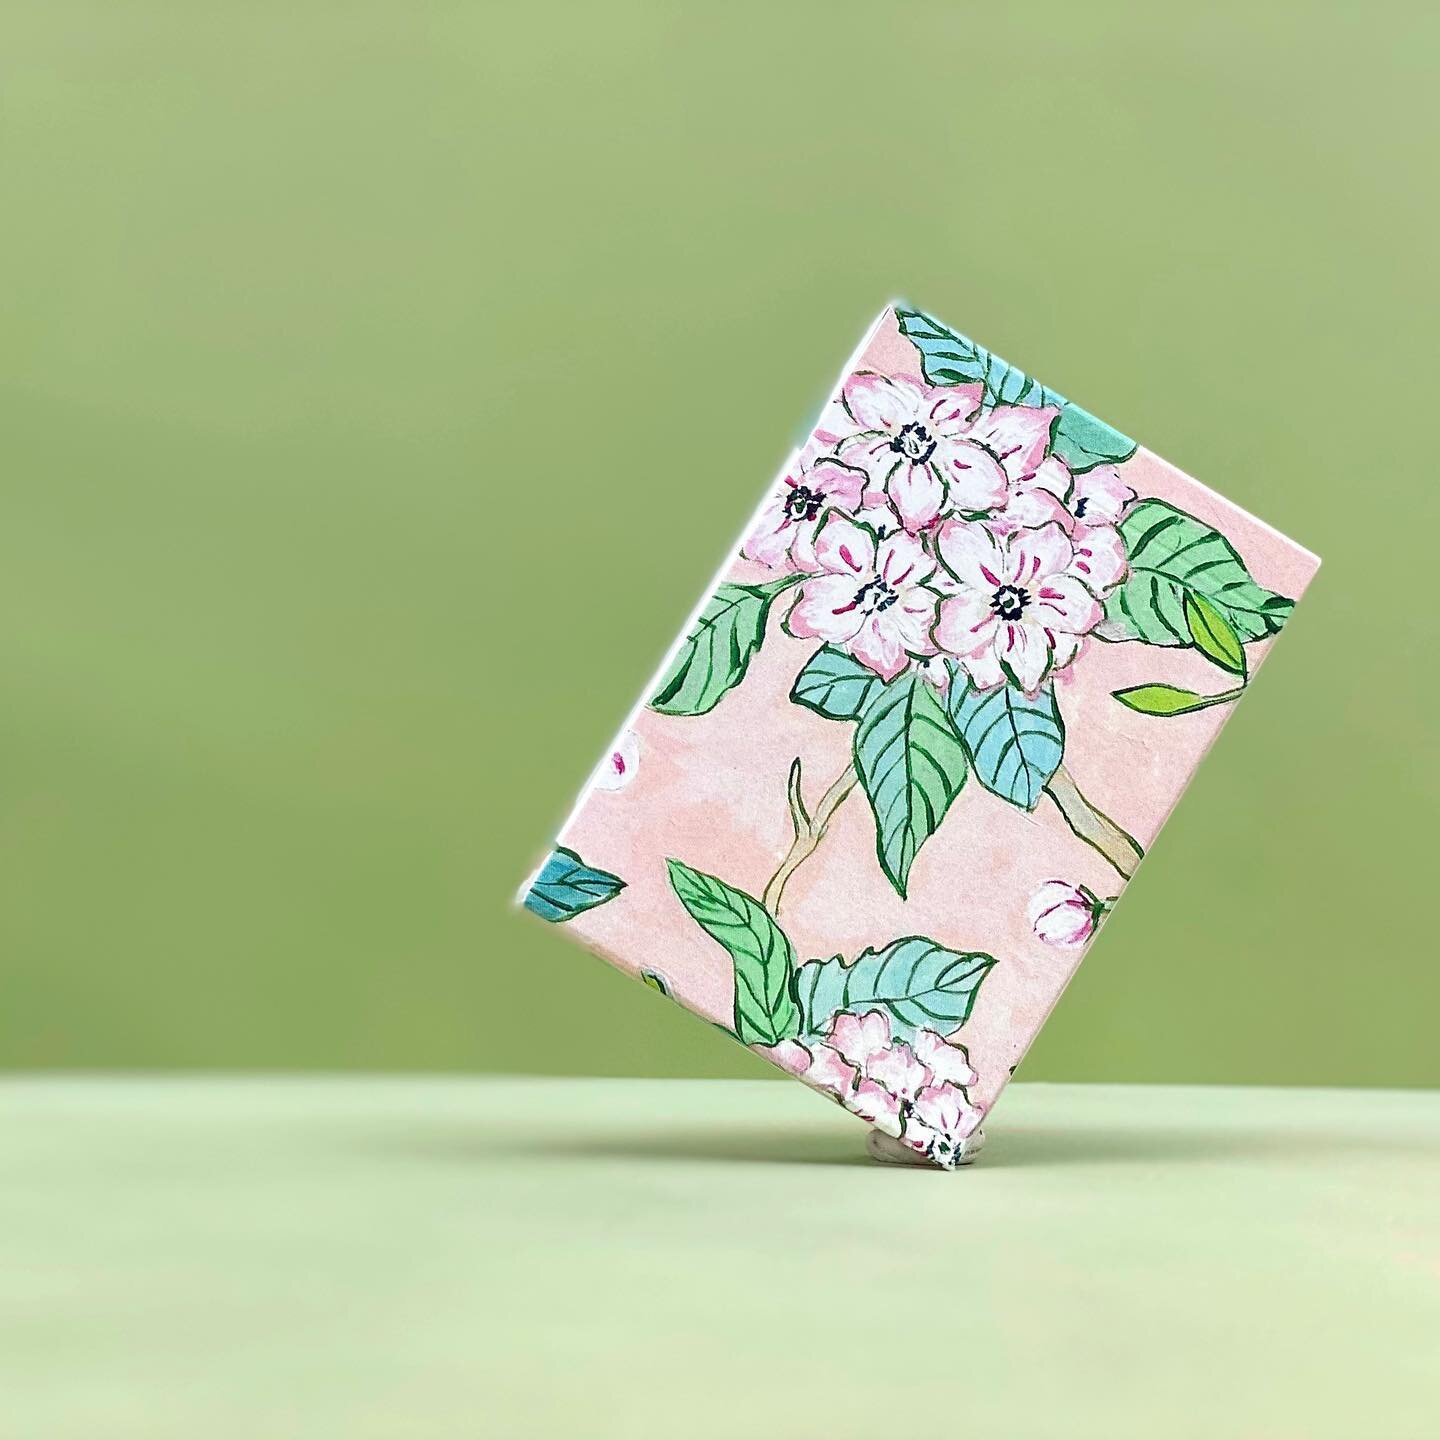 ~secret garden~ playing cards! Online @ the link in my profile and so pretty 😍 PLUS: a big announcement in my stories! 

#secretgarden #cottagecore #grandmillennialdecor #grandmillenialstyle #chinoiserie